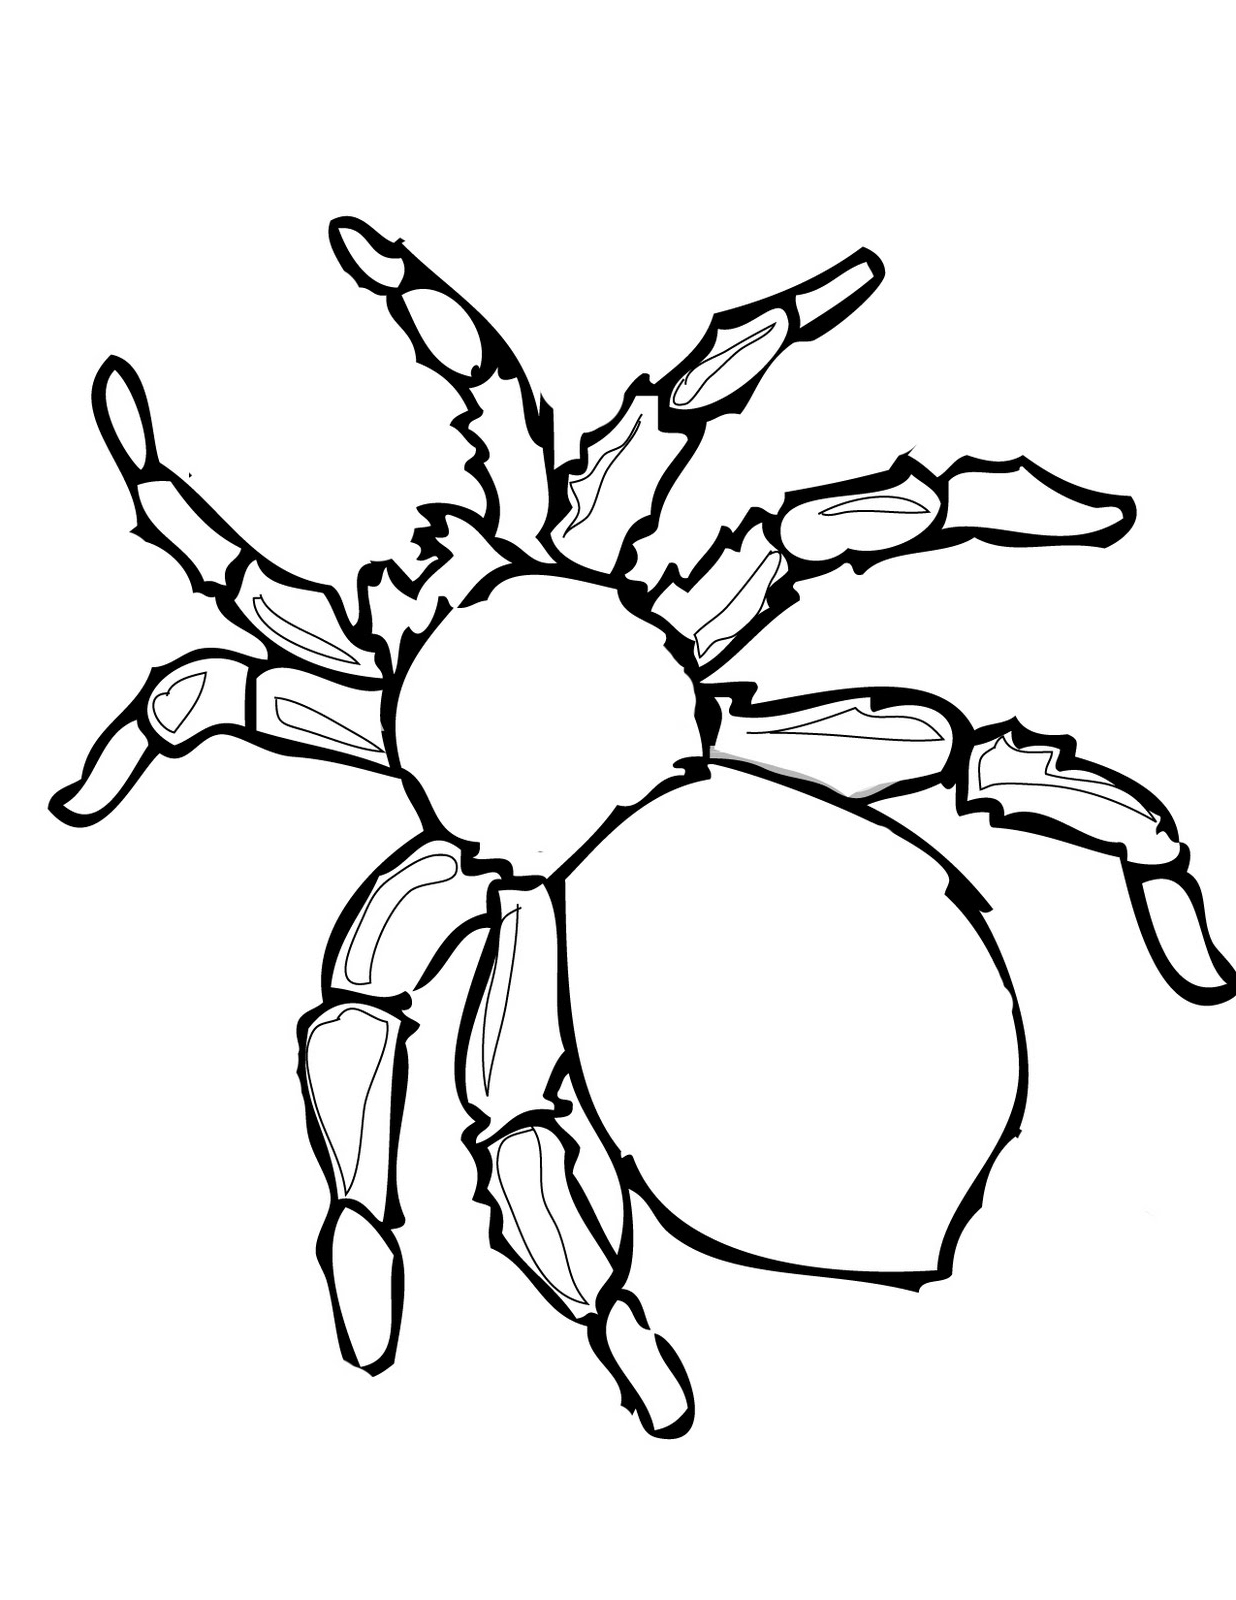 New Halloween Spider Coloring Pages for Kids